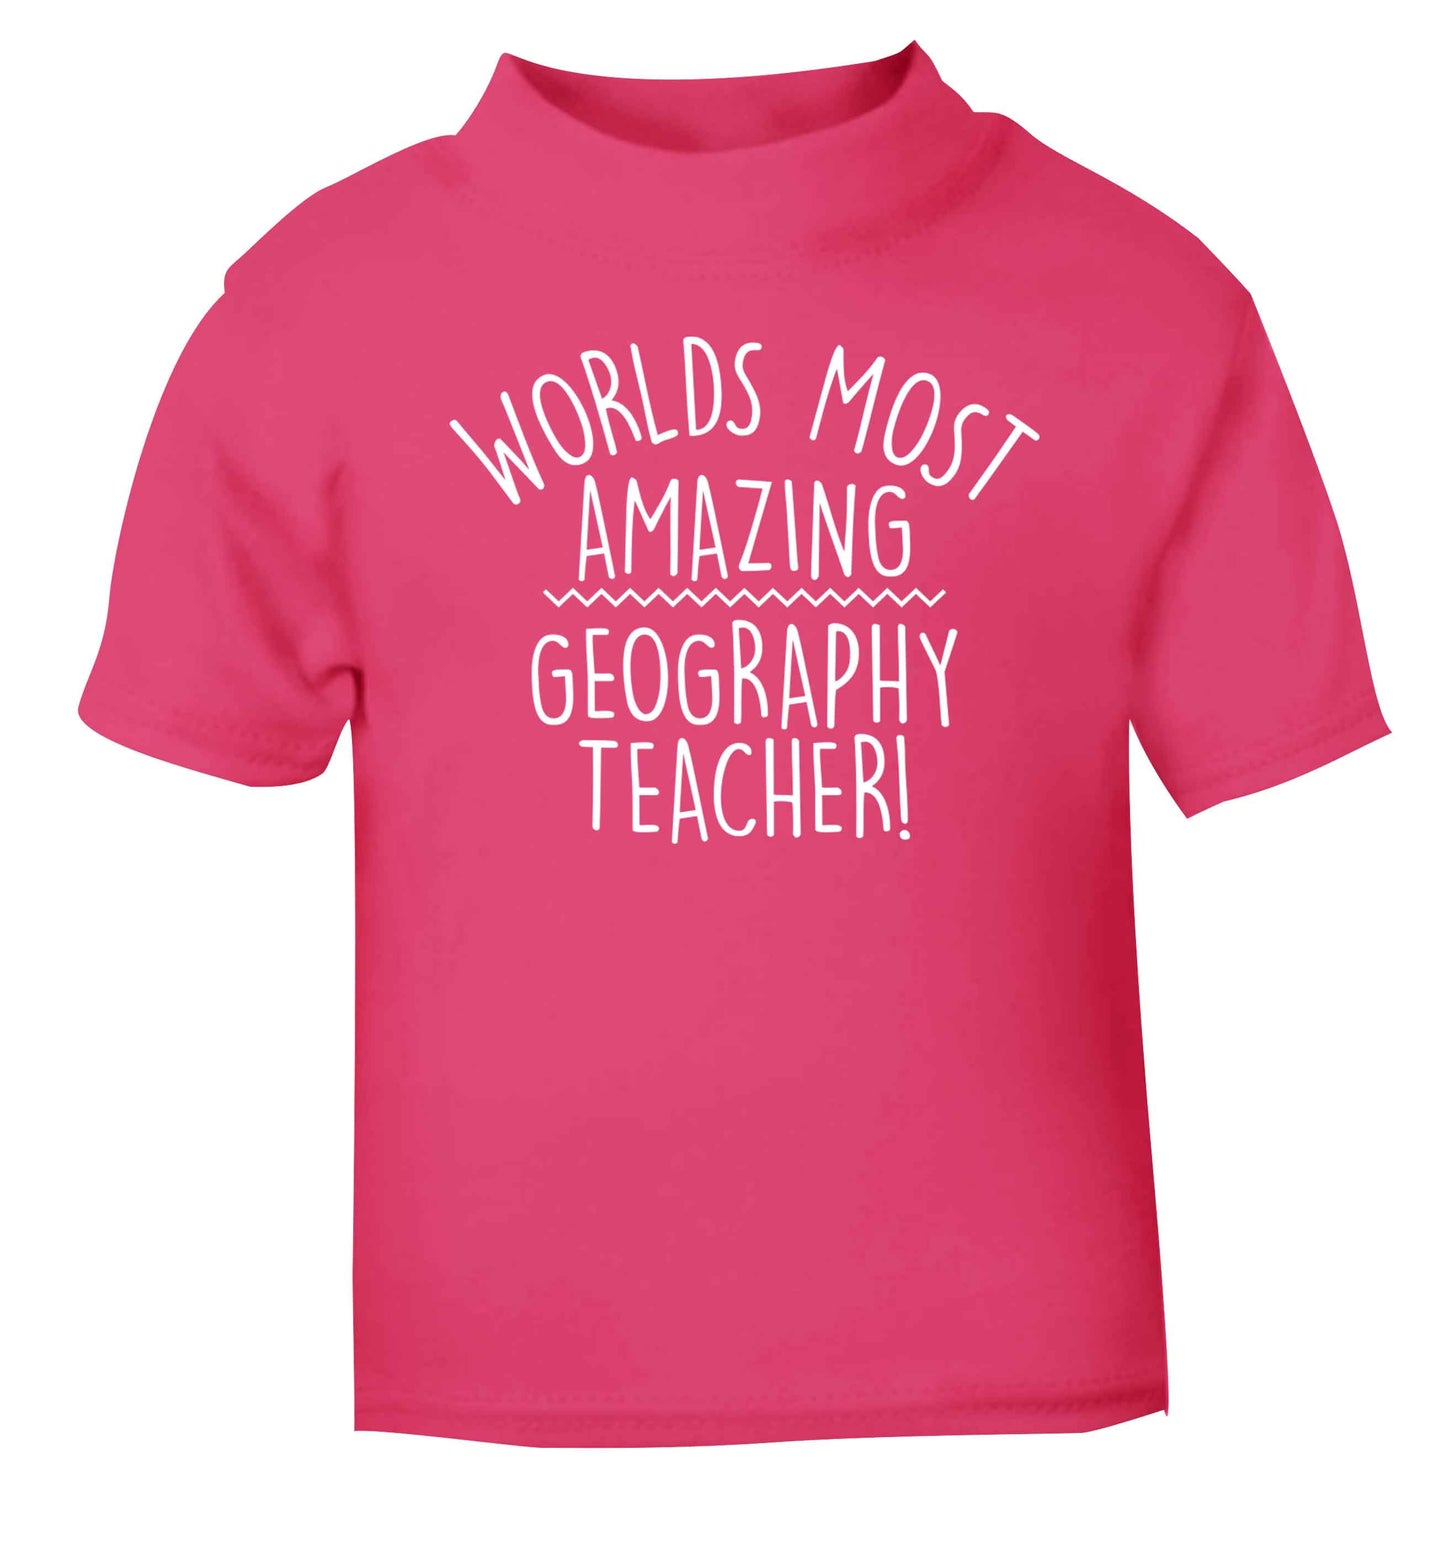 Worlds most amazing geography teacher pink baby toddler Tshirt 2 Years